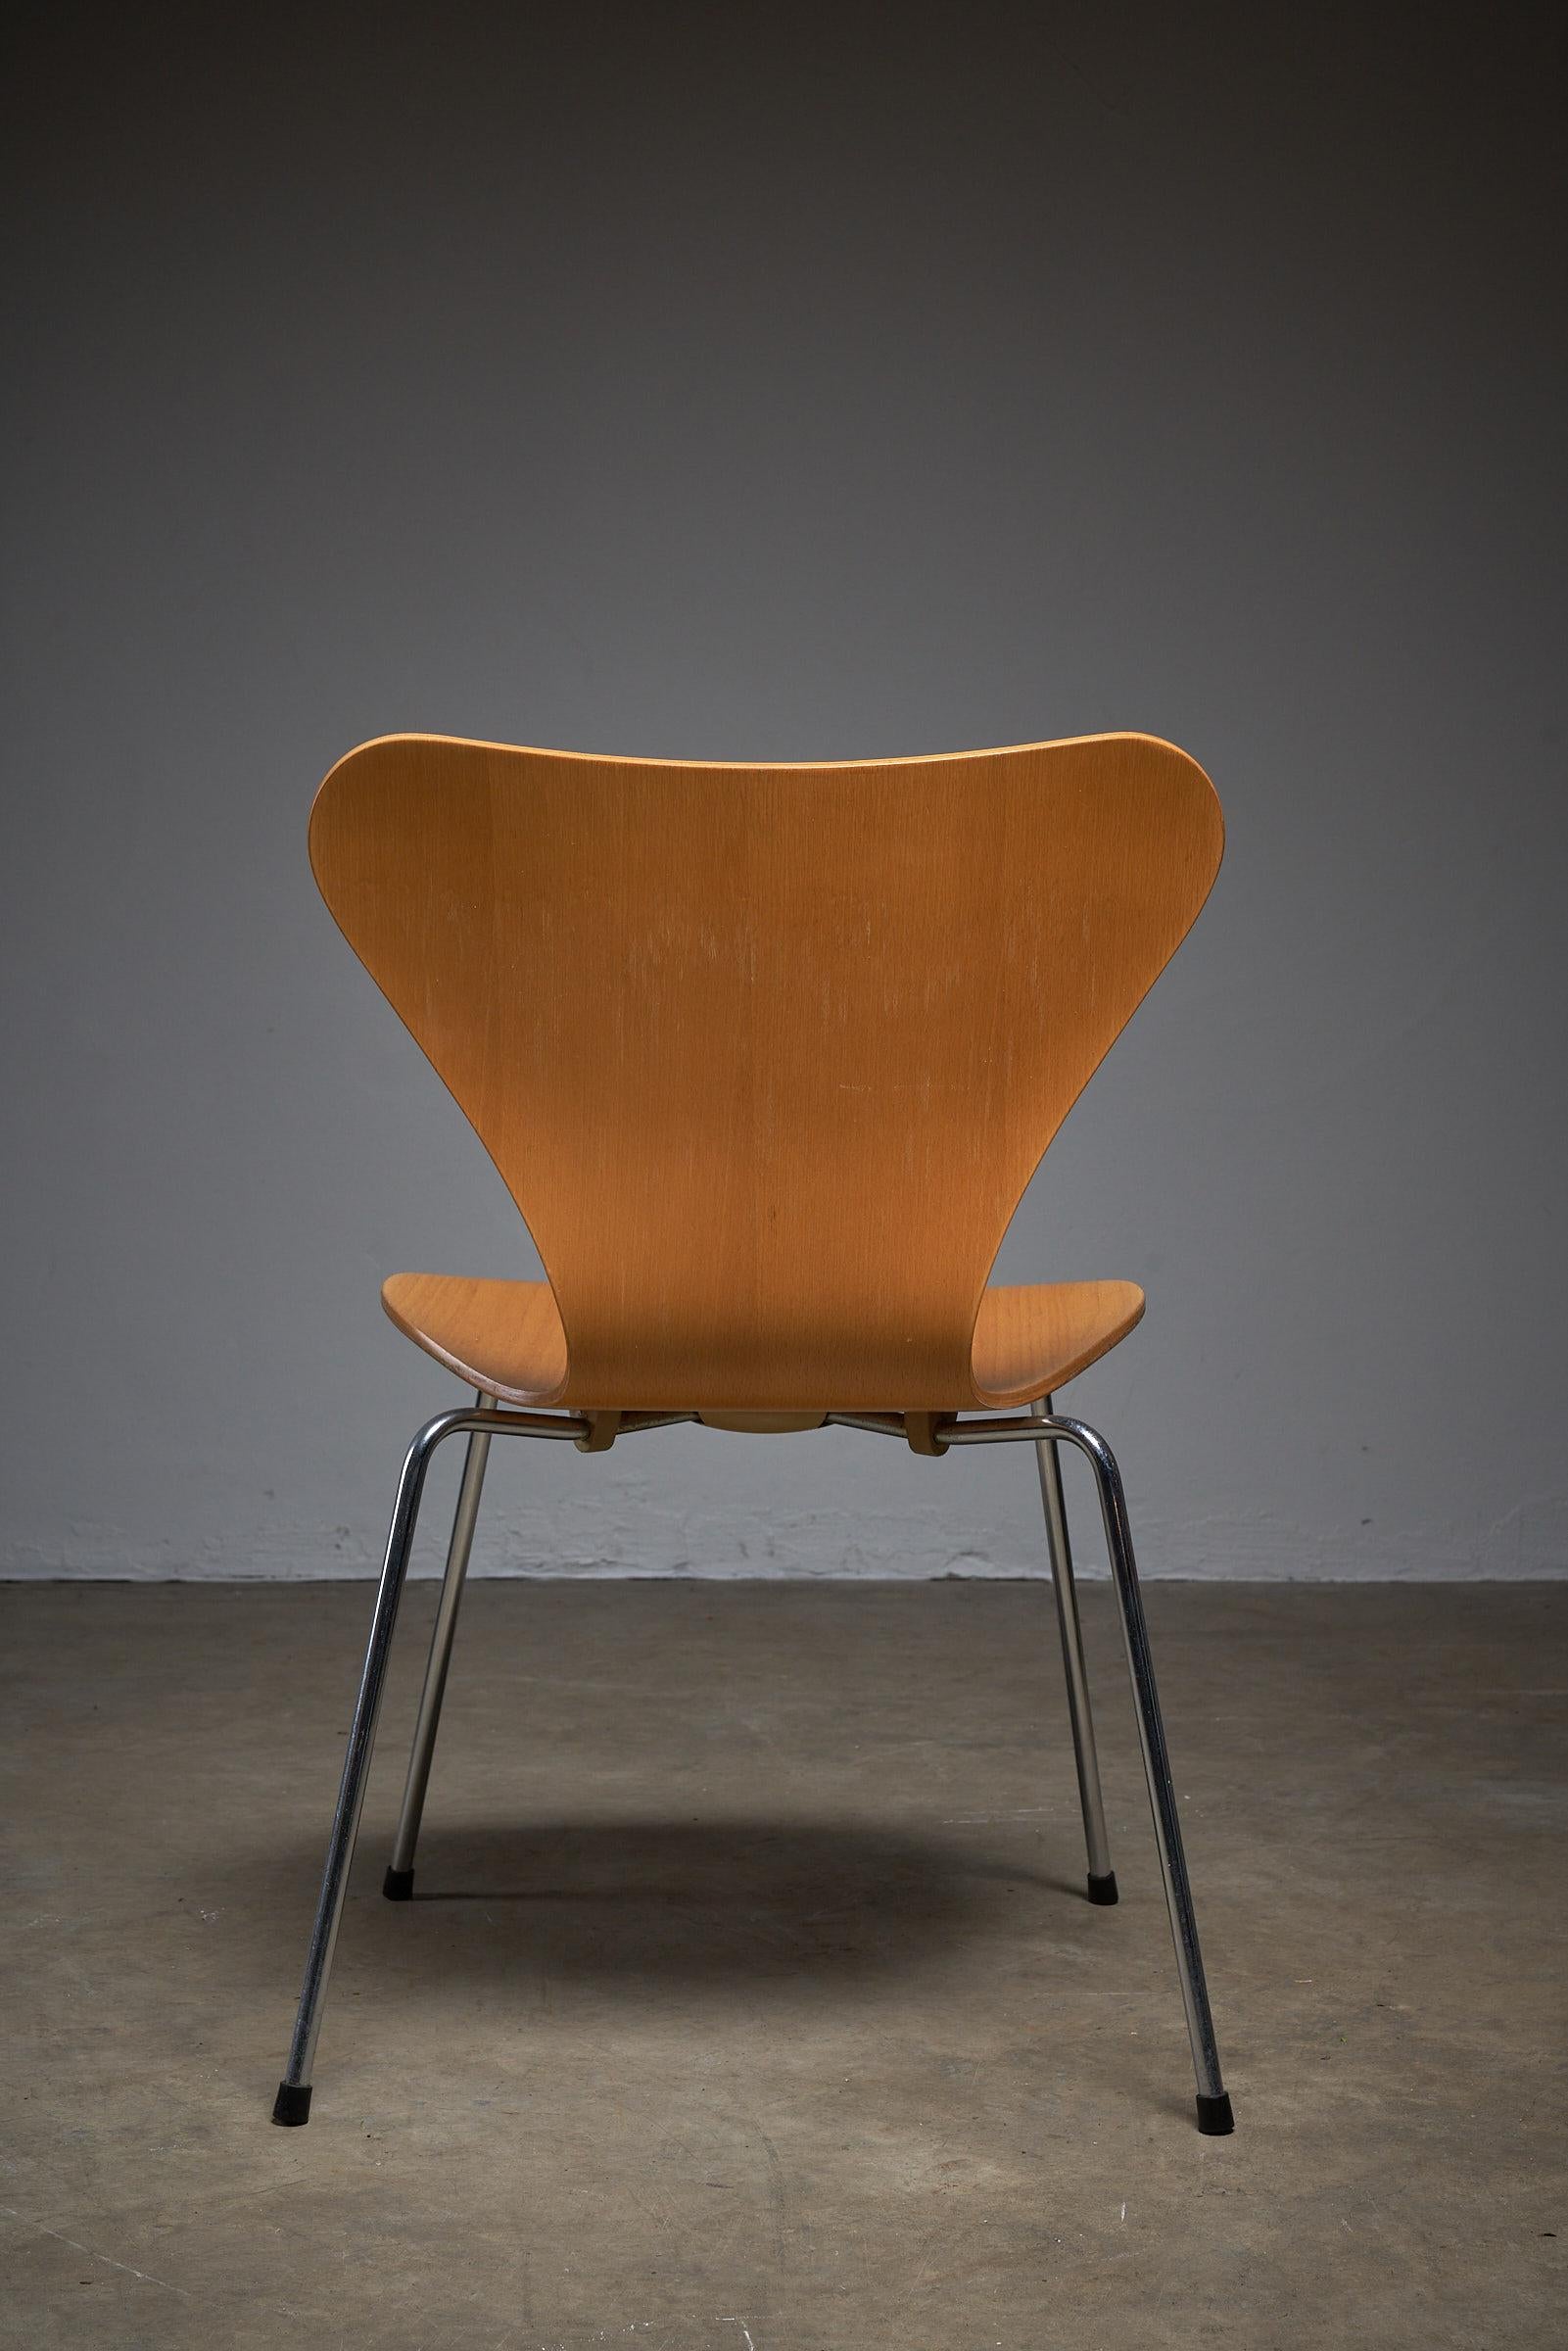 Mid-20th Century Arne Jacobsen Model 7 Vintage Chairs for Fritz Hanssen, 12+ pieces For Sale